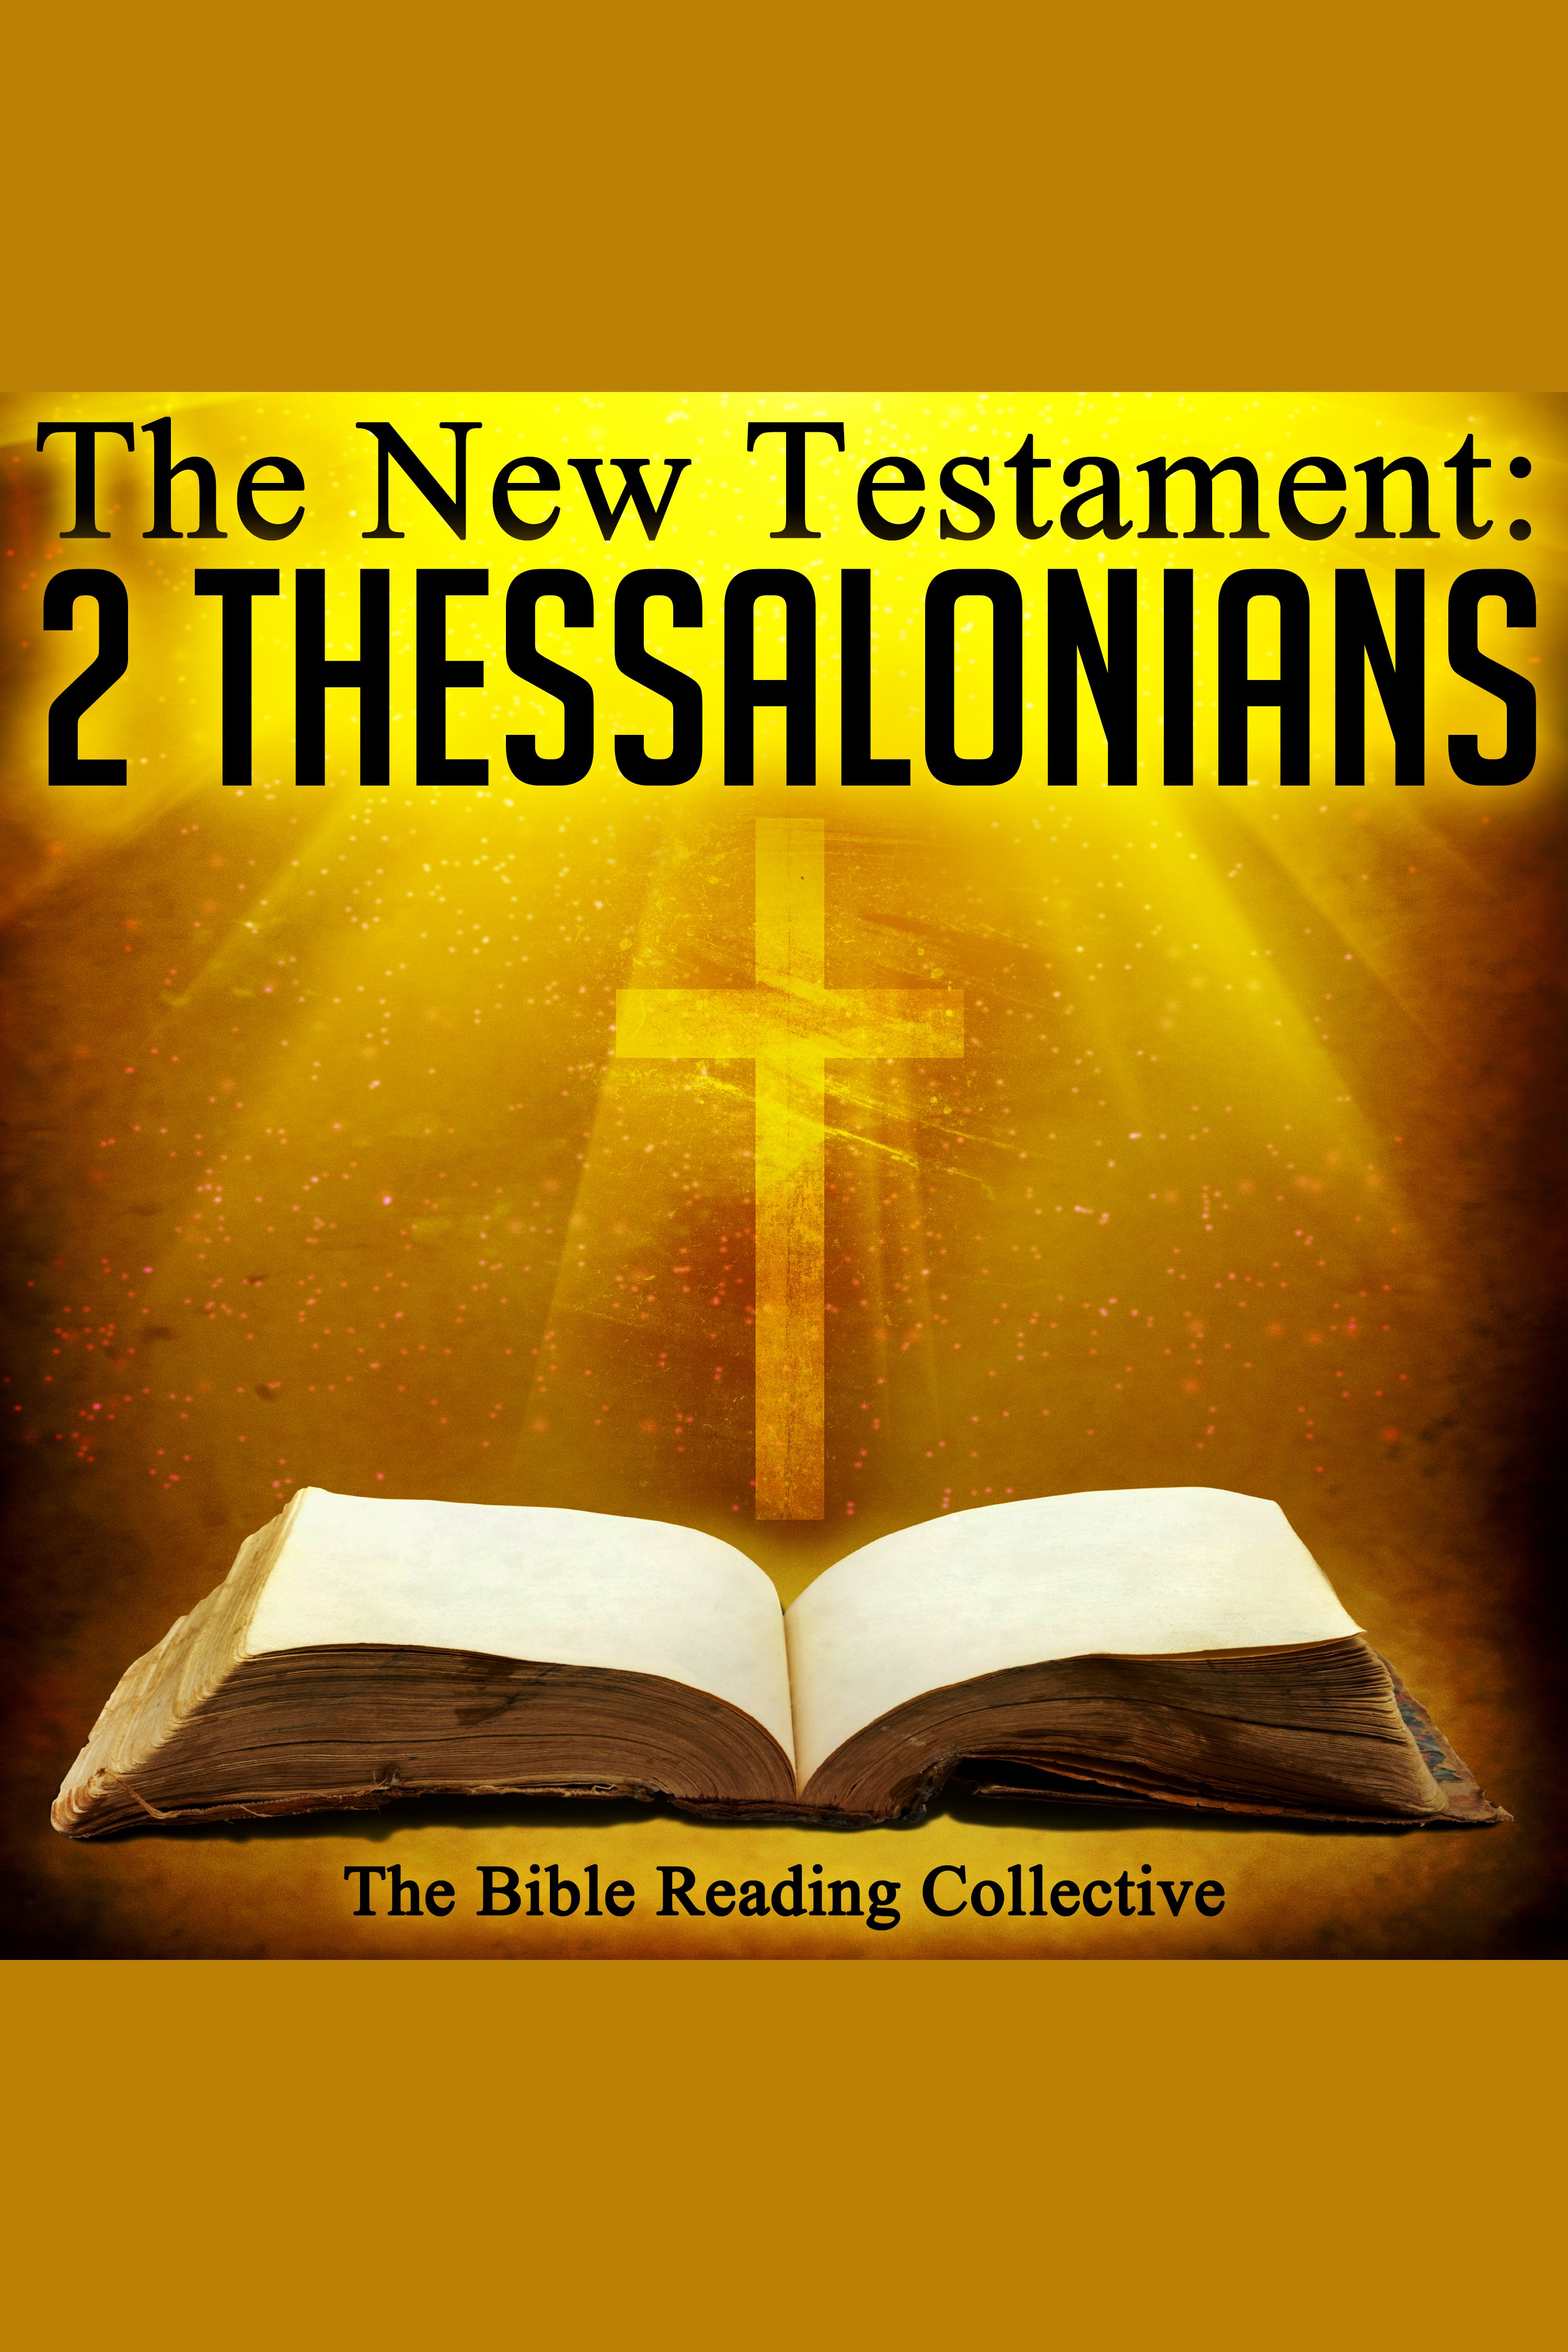 The New Testament: 2 Thessalonians cover image